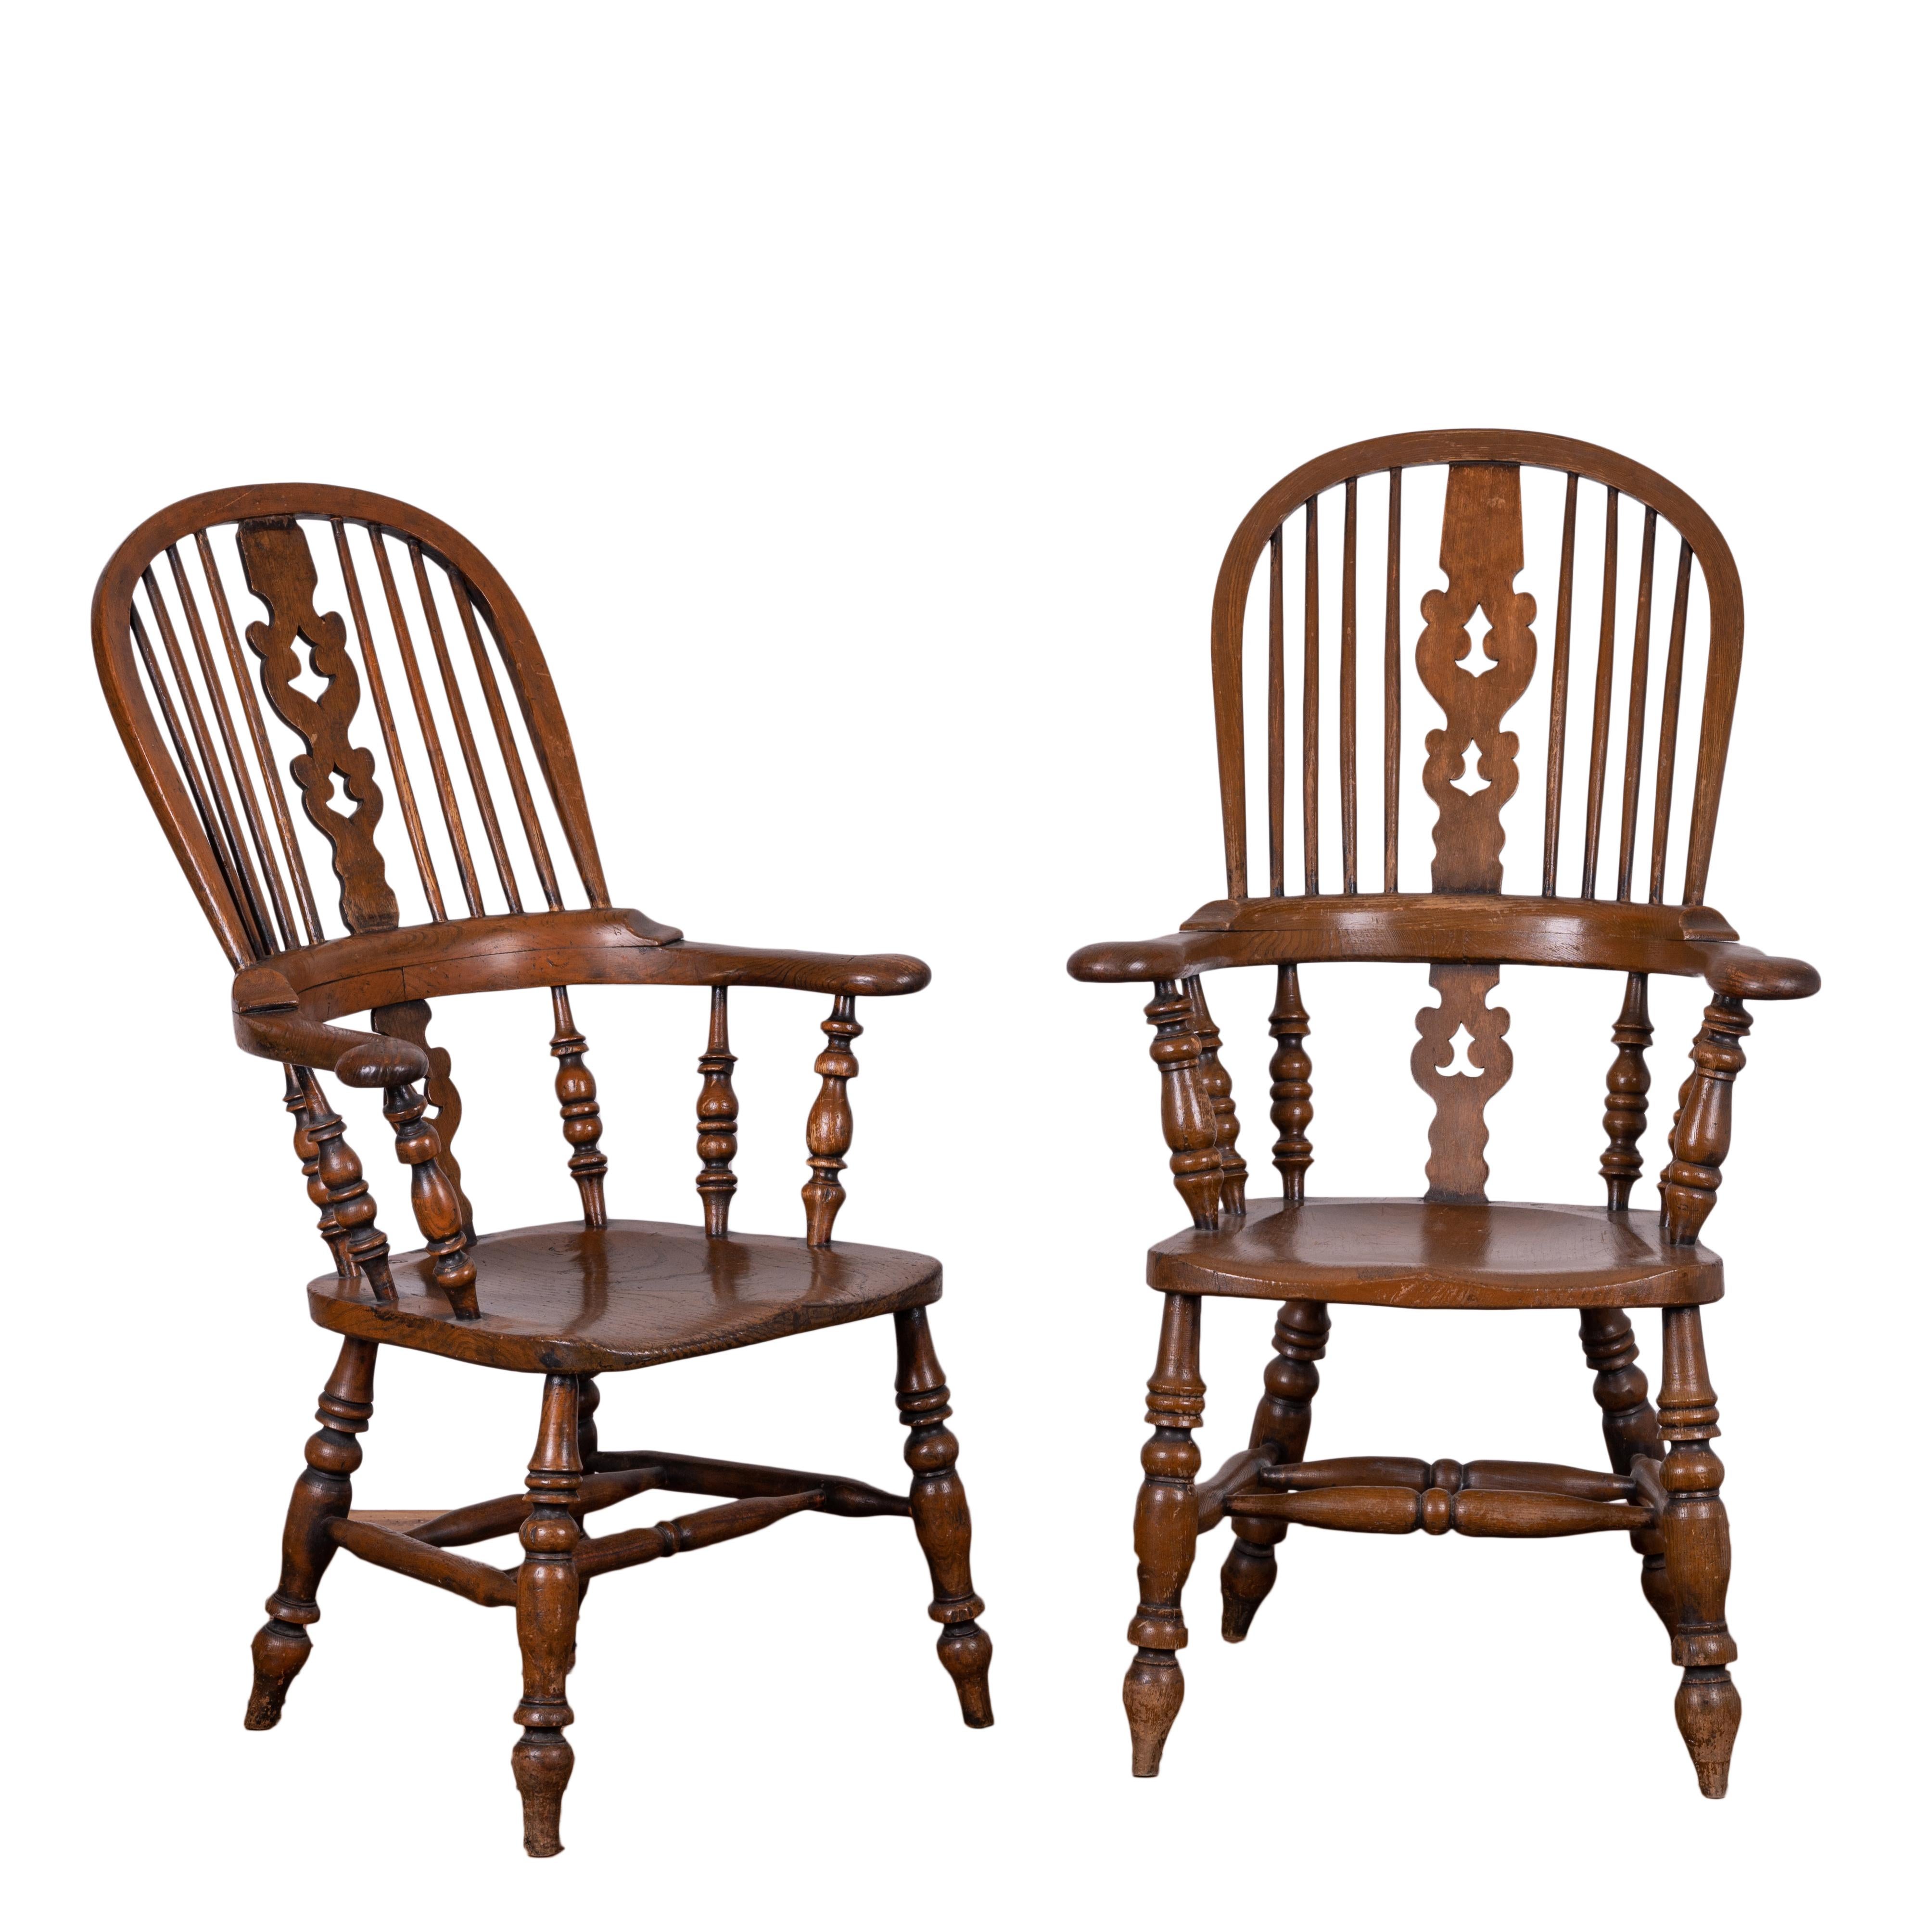 English Elm Broad Arm Windsor Armchairs, 19th Century - Set of 4 For Sale 5